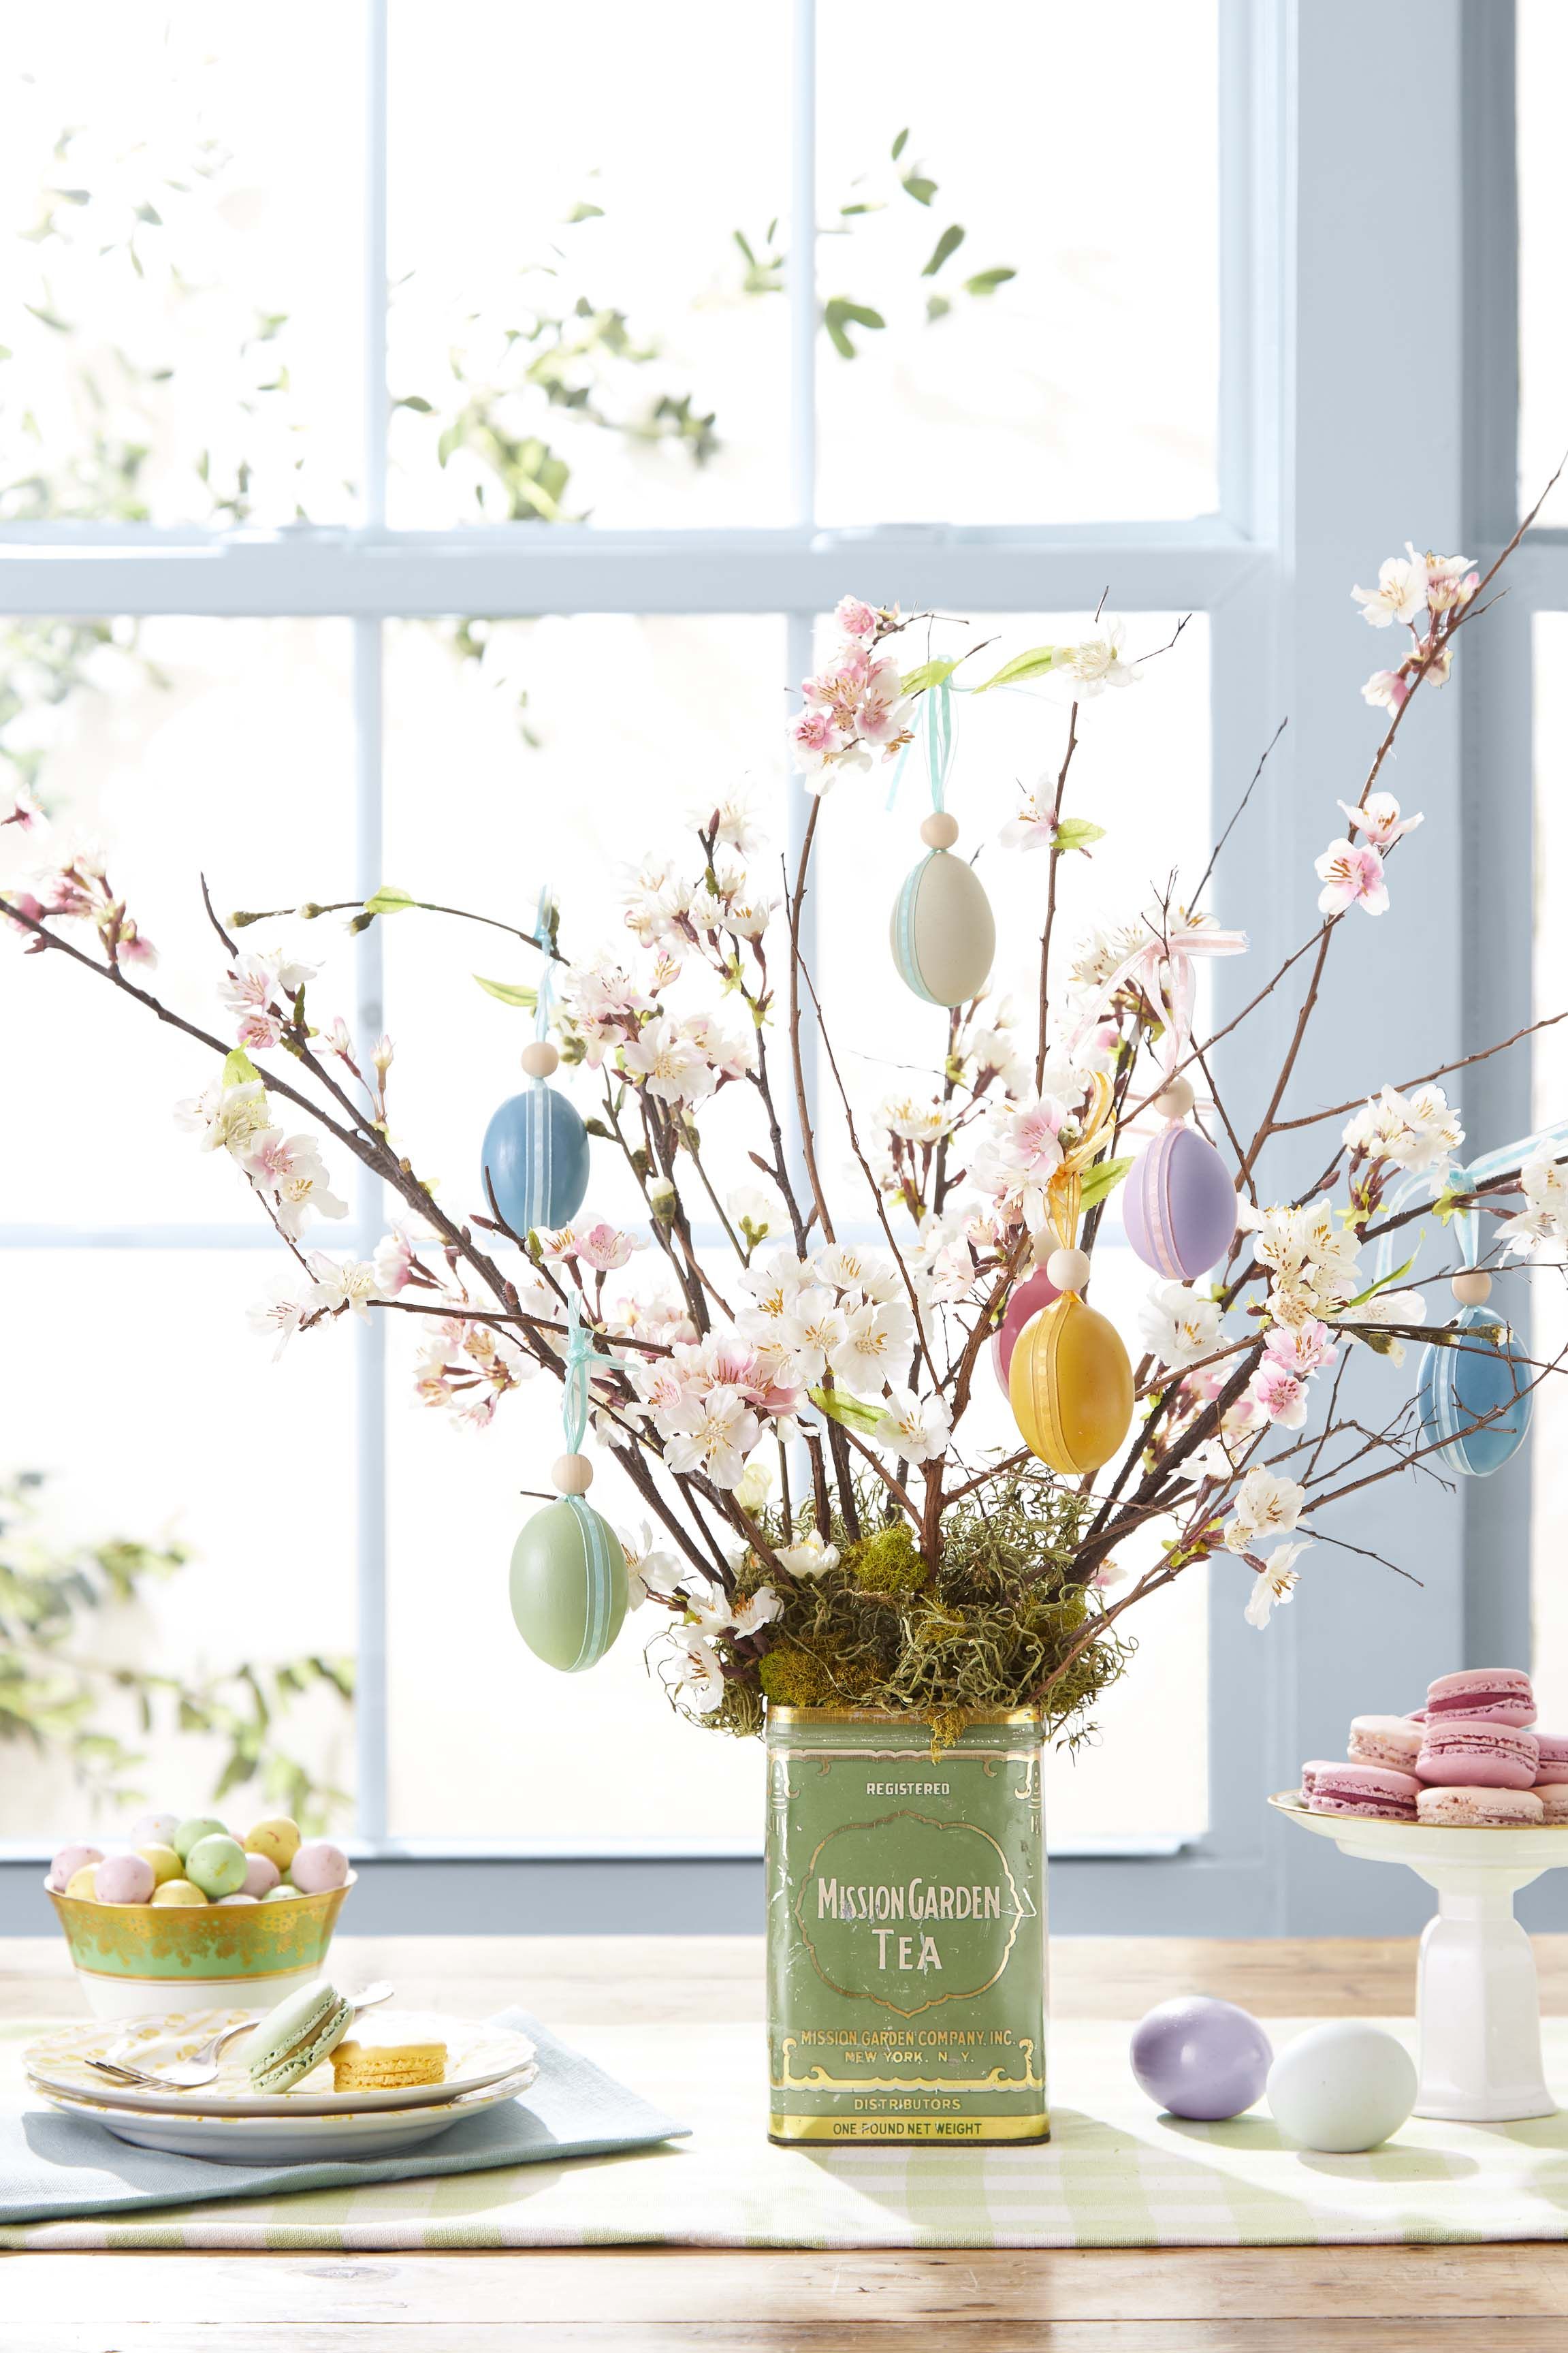 Homemade Easter decorations